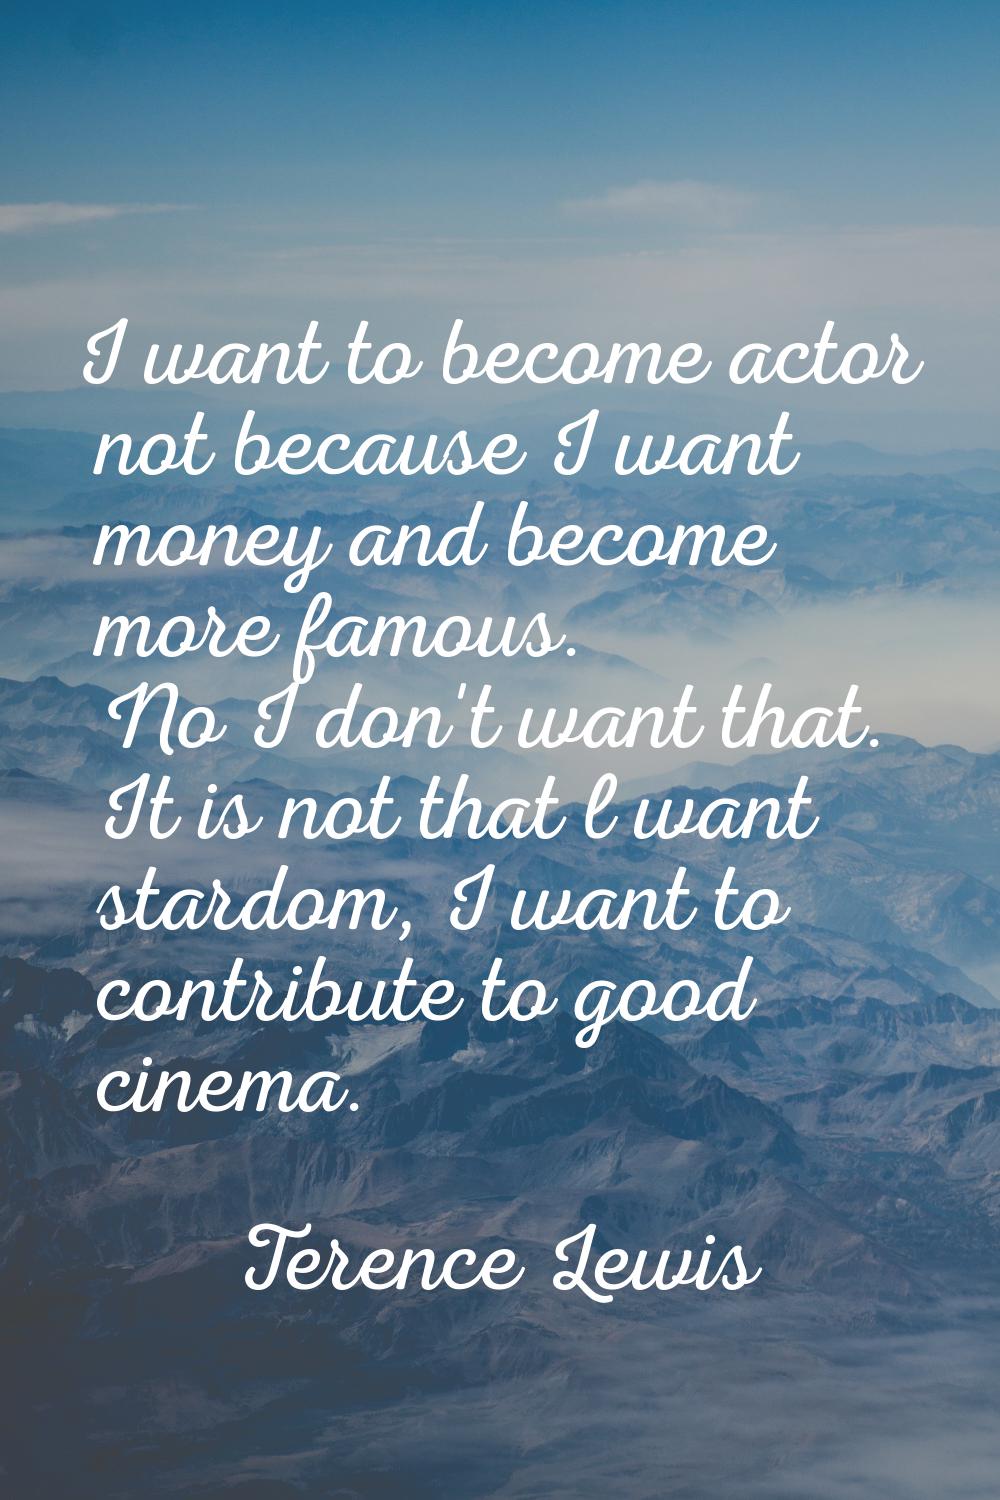 I want to become actor not because I want money and become more famous. No I don't want that. It is